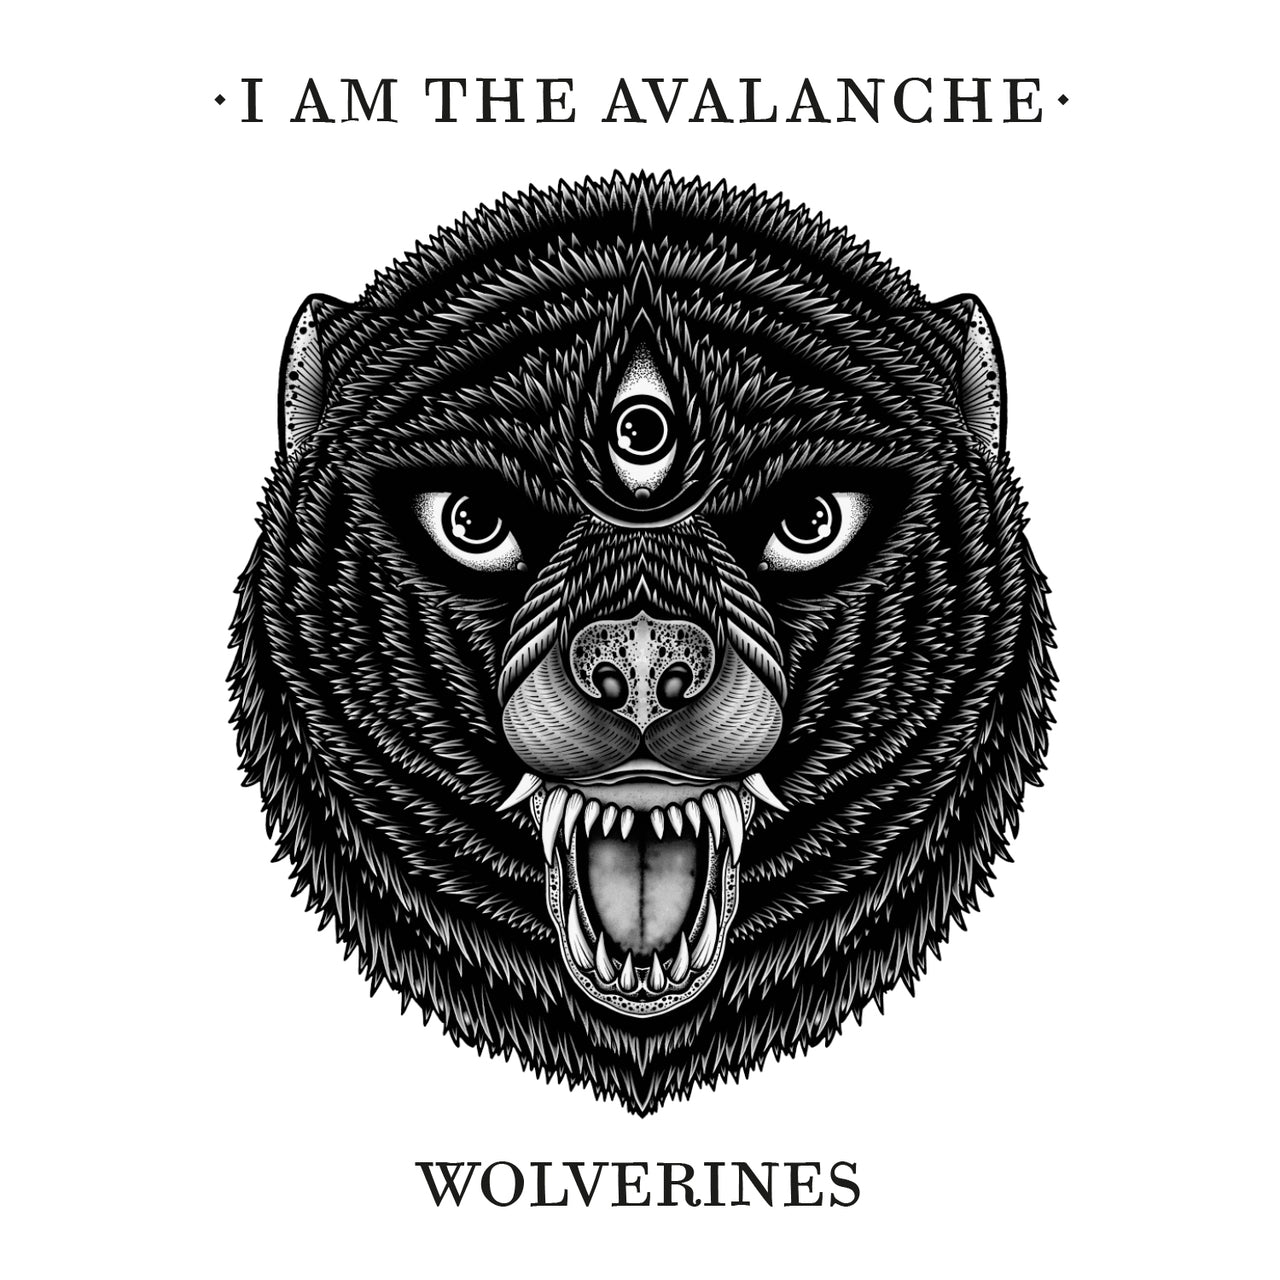 I Am The Avalanche "Wolverines" CD